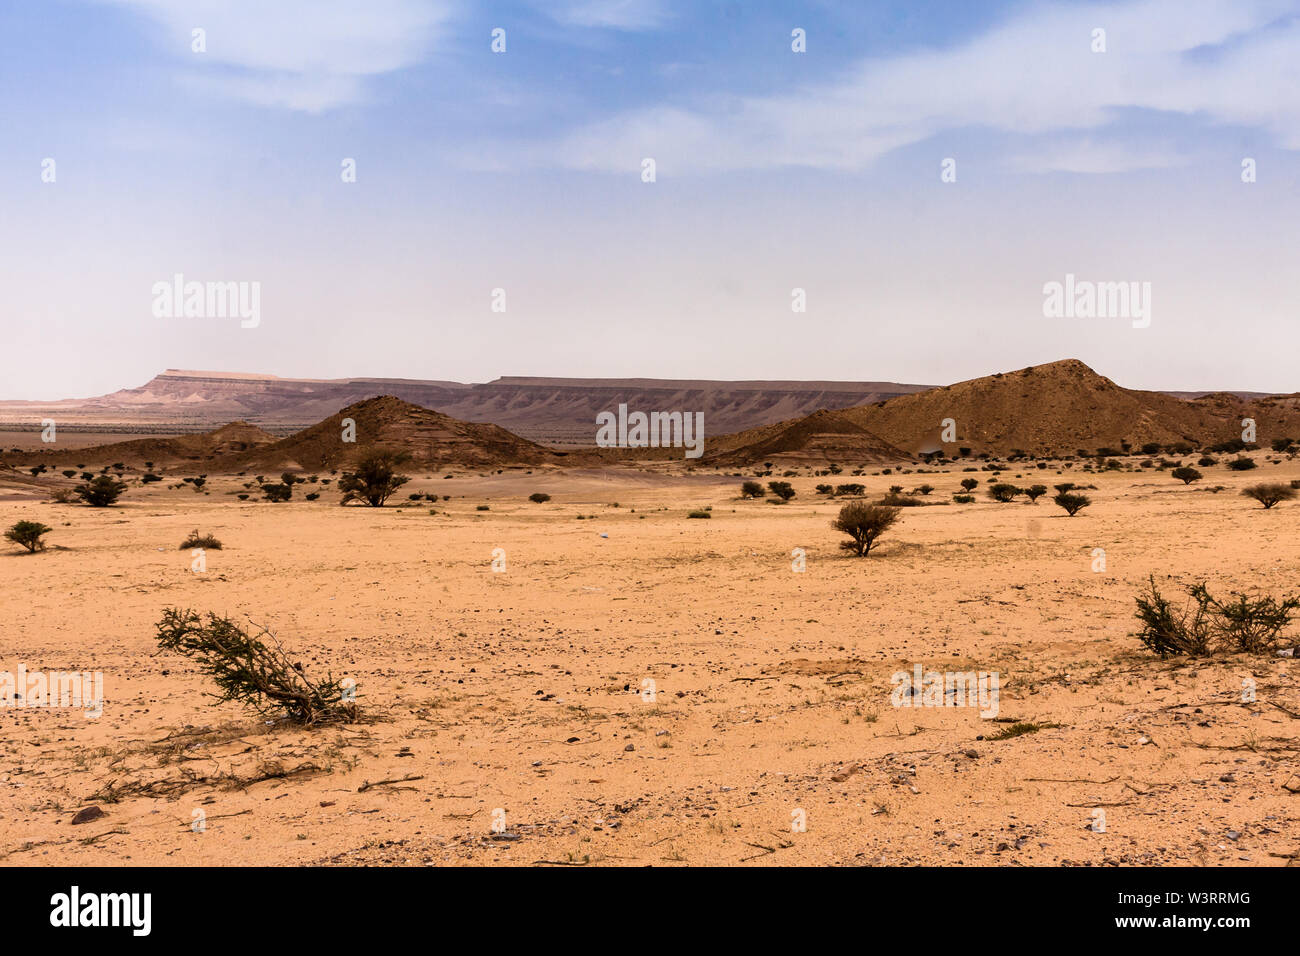 A desert landscape south-west of Riyadh; A combination of plain and rocky hill terrain typical for Riyadh Province Stock Photo